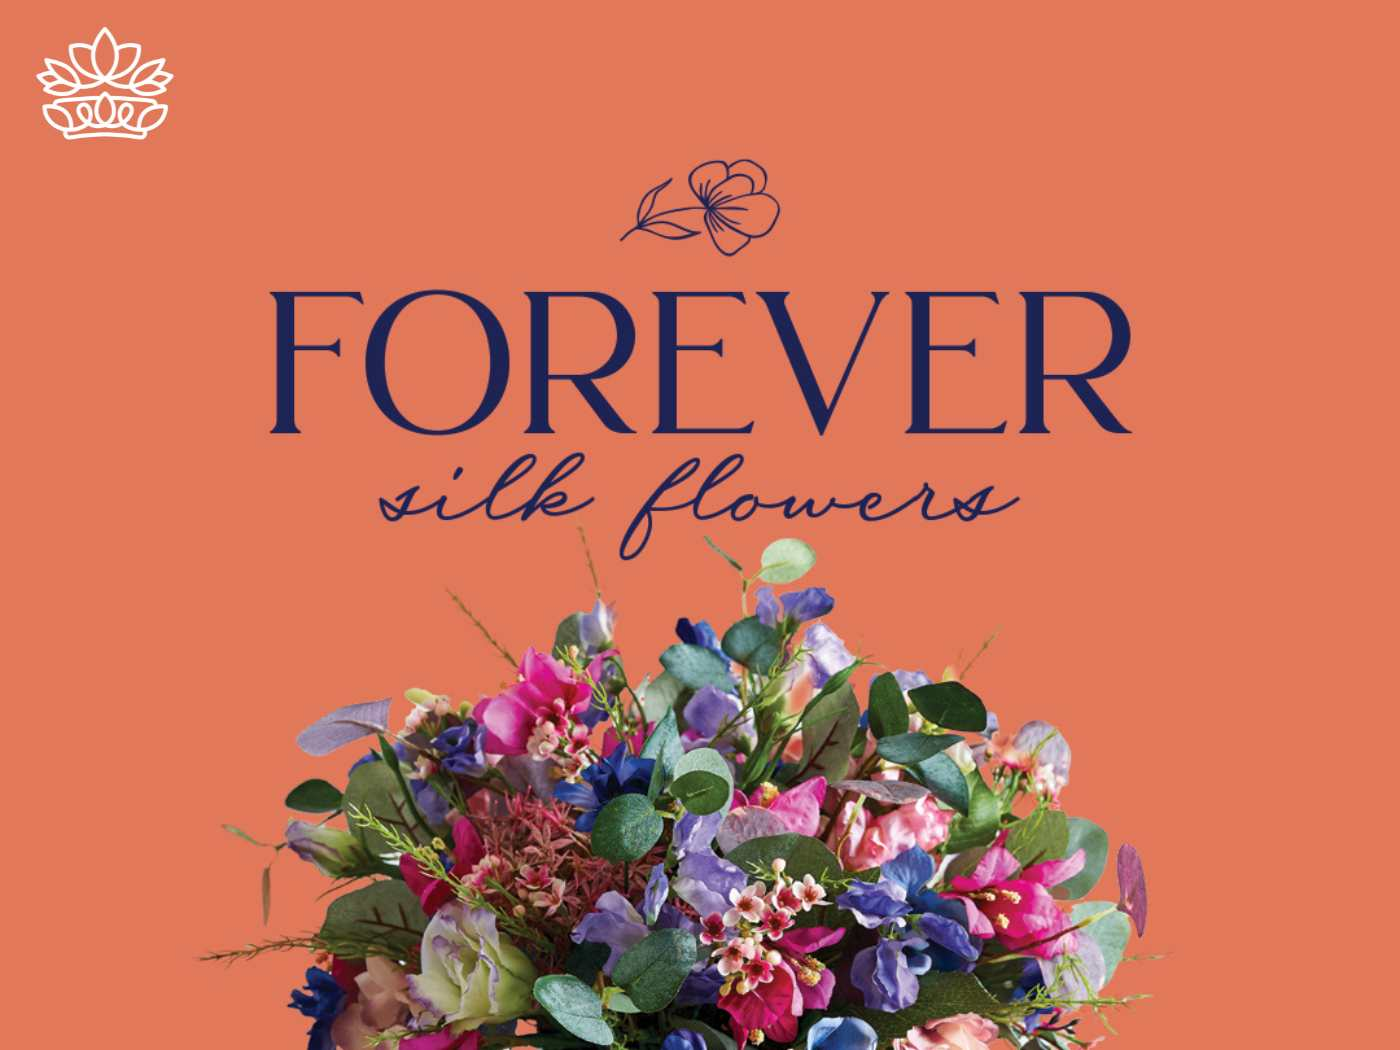 A sumptuous arrangement of vibrant silk flowers in full bloom, set against a striking orange background with the bold text 'FOREVER silk flowers', representing everlasting beauty for all occasions from Fabulous Flowers and Gifts.